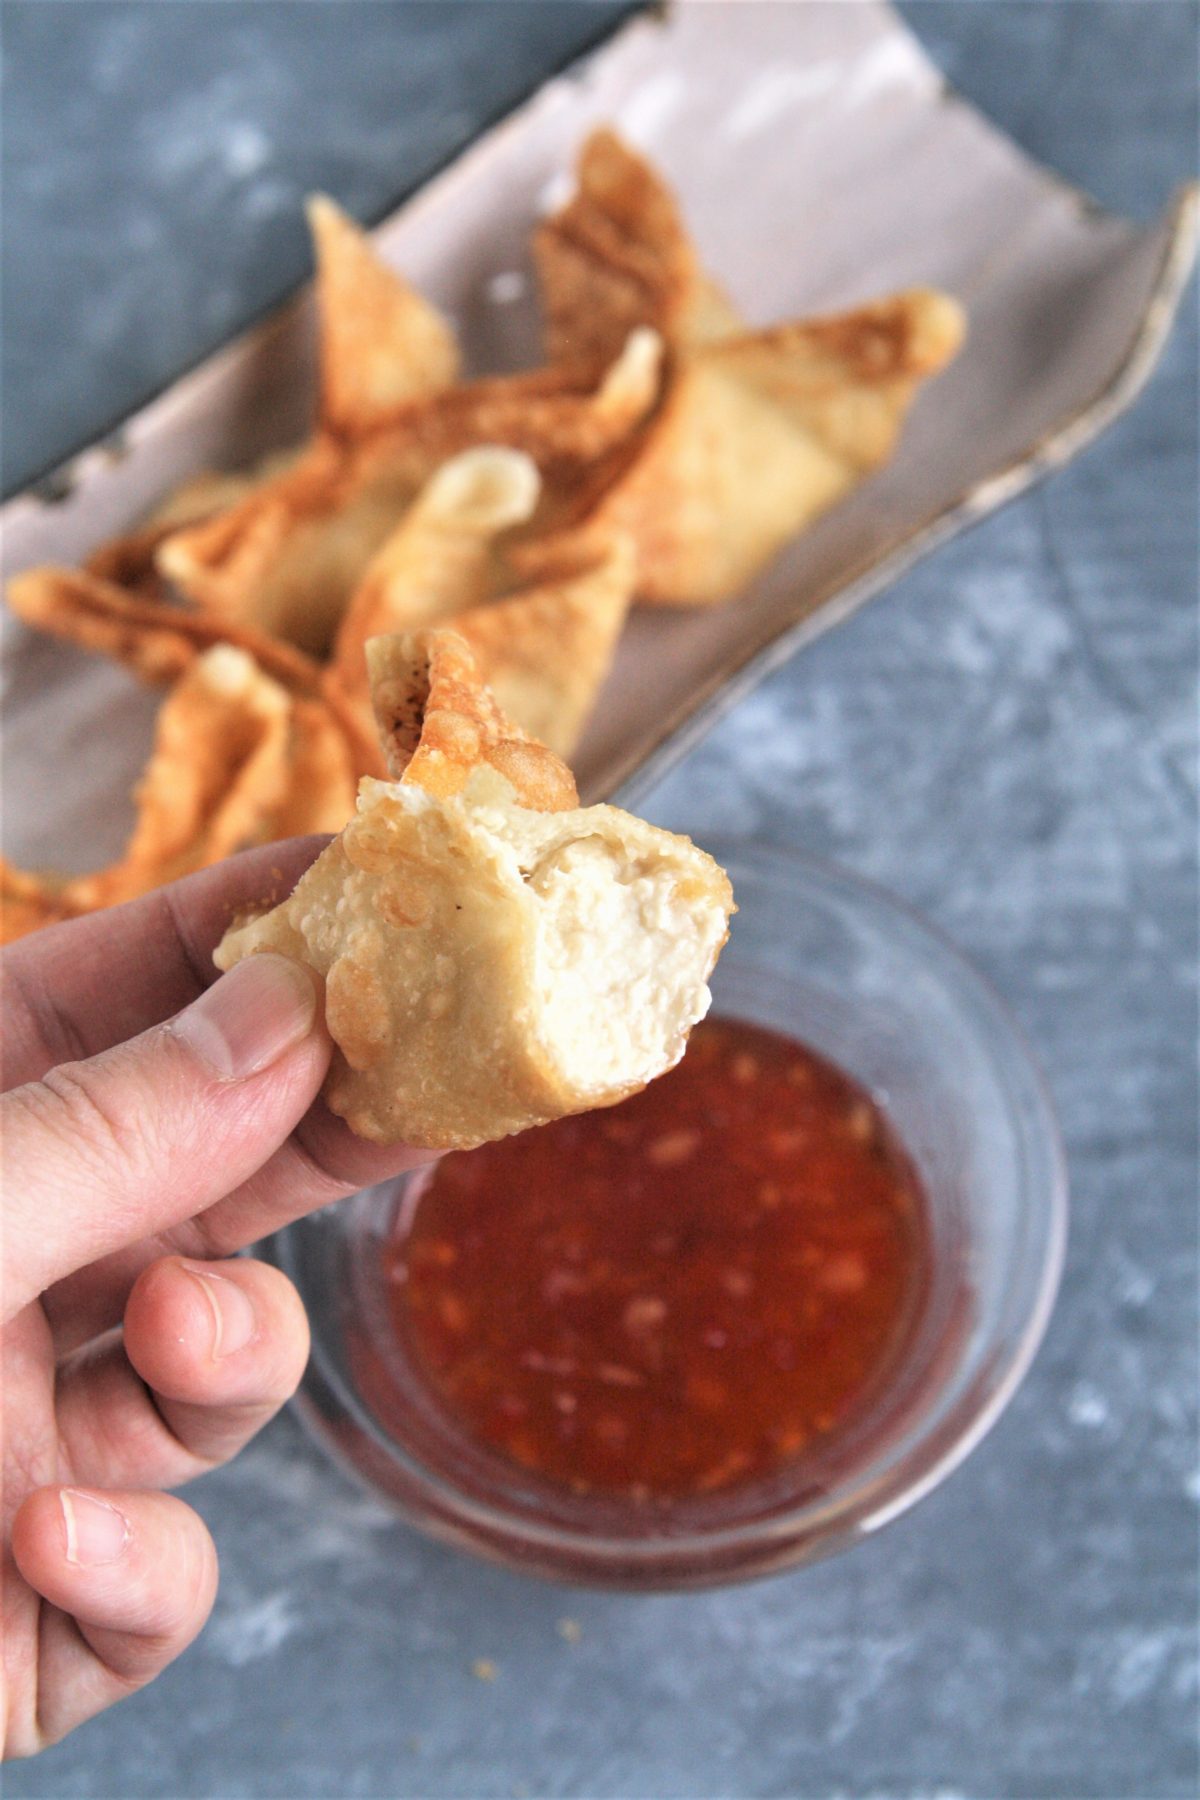 Panda Express Copycat Cream Cheese Rangoon with creamy filling and crispy wonton wrappers are a tasty appetizer - a real crowd pleaser that leaves everyone coming back for more!